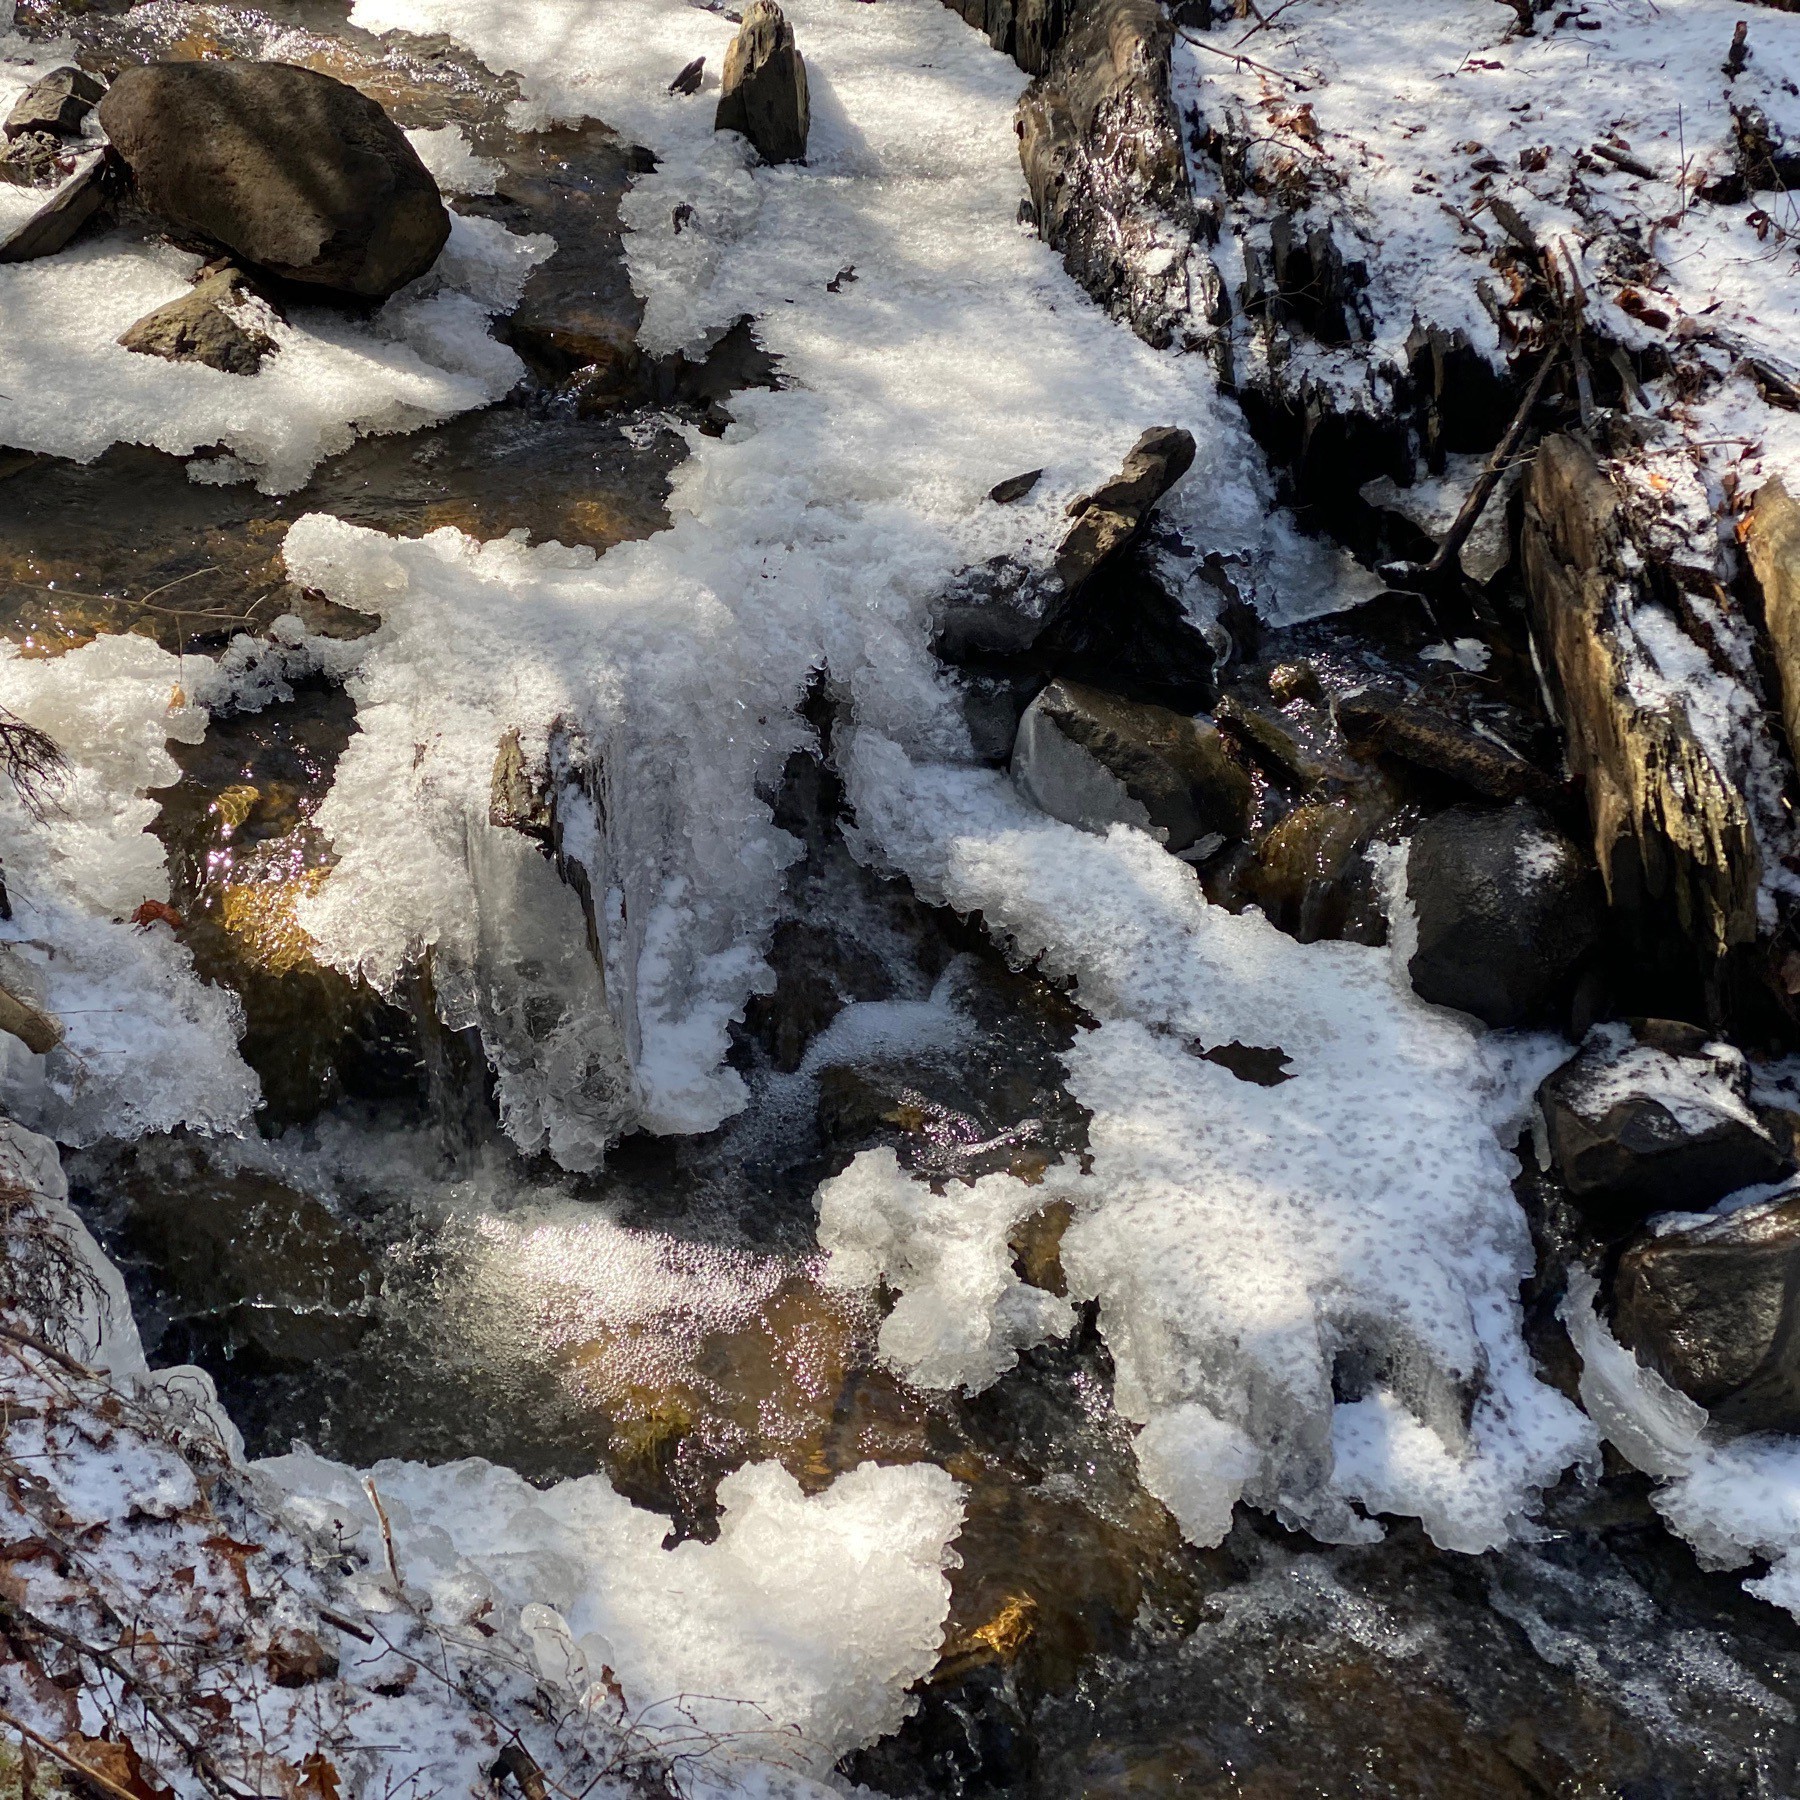 Frozen snow and flowing water in stream.